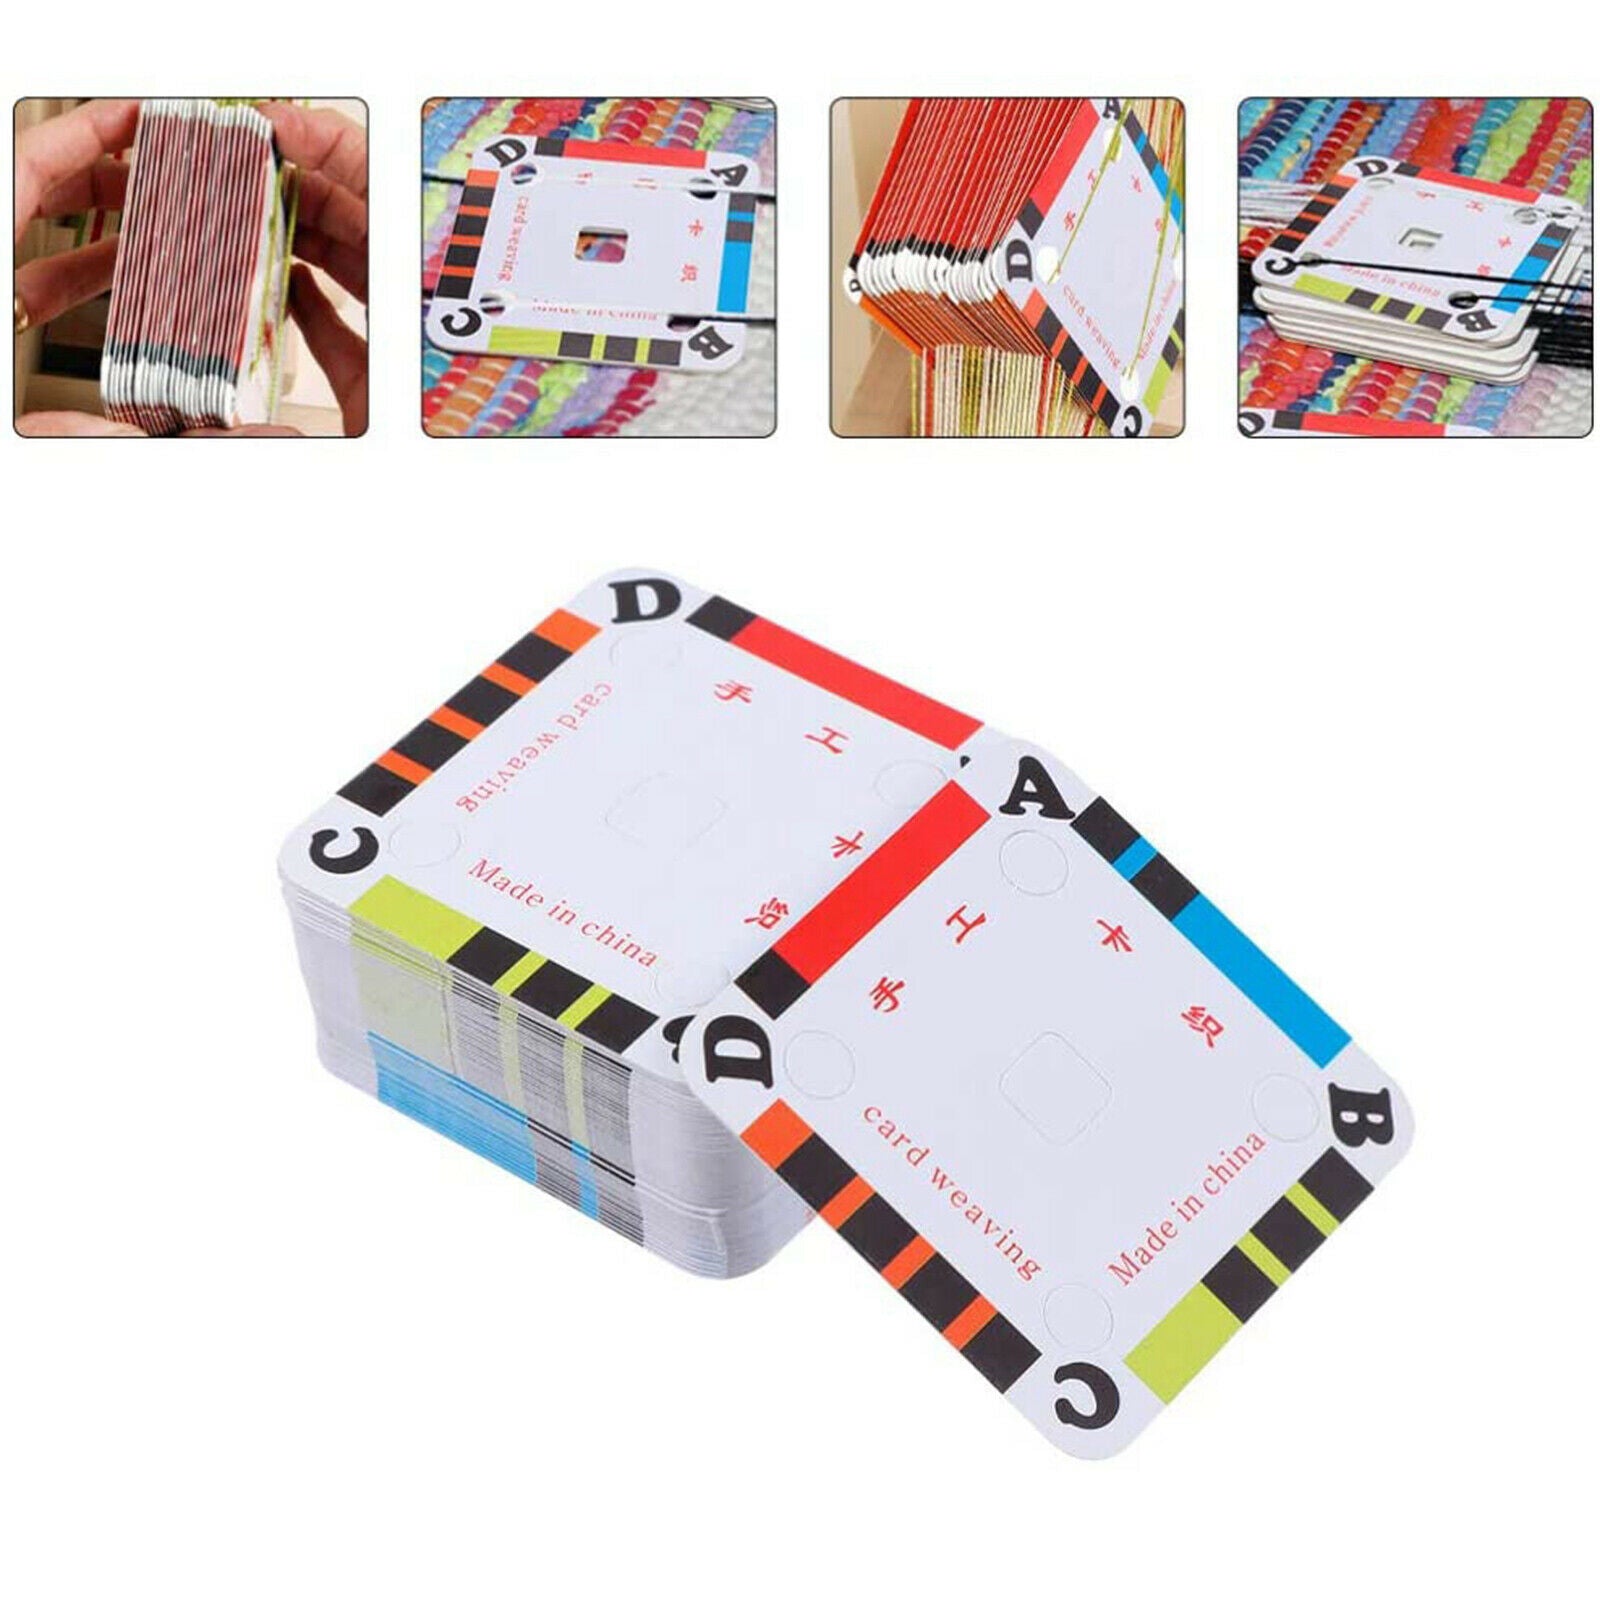 Handy Weaving Cards Smooth Surface for Loom or Inkle Loom Craft Weaving Accs